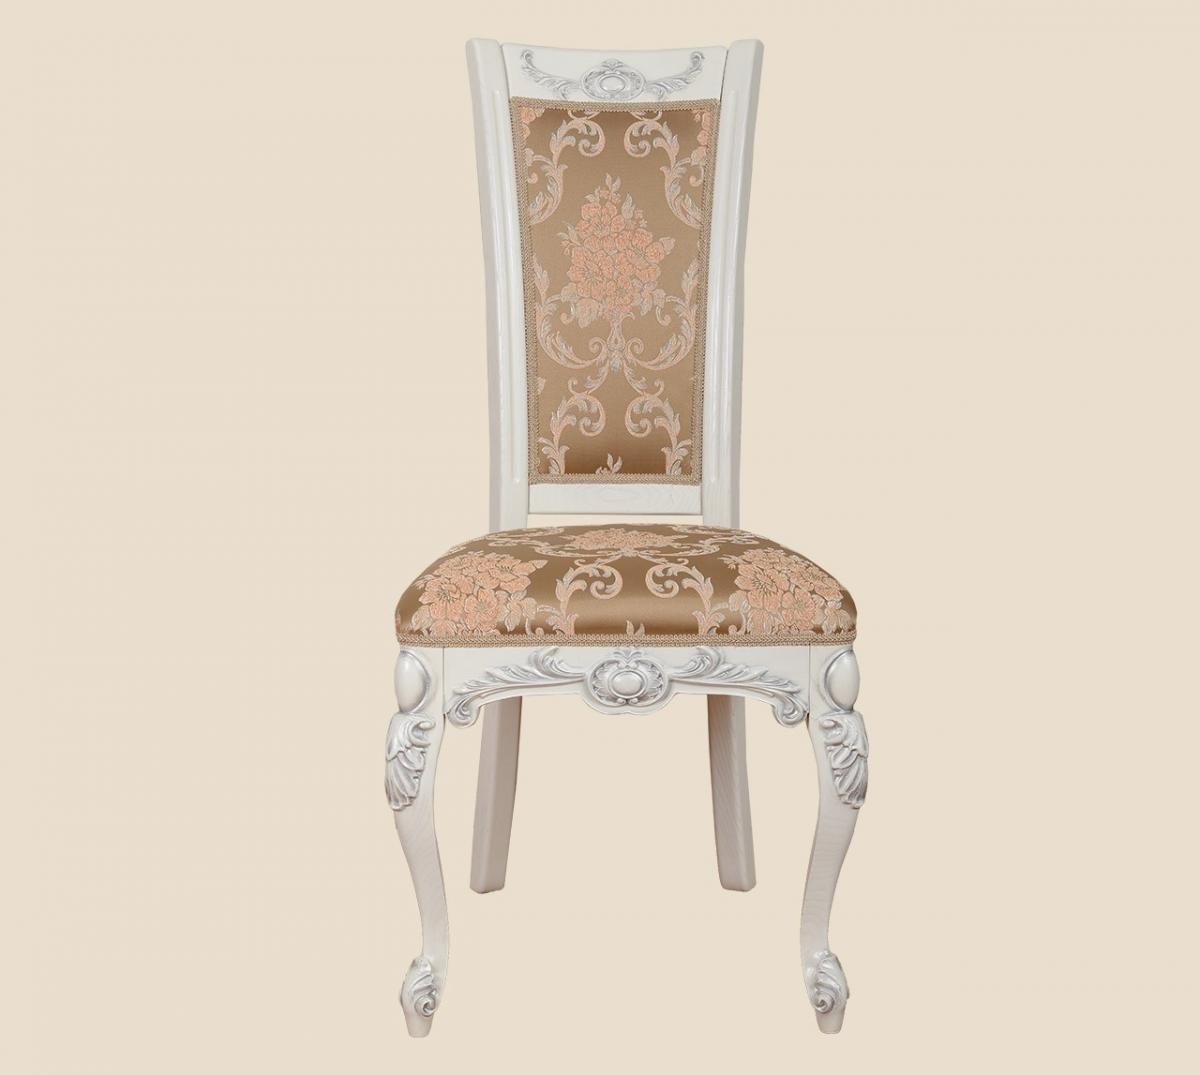 The chair "Viscount"